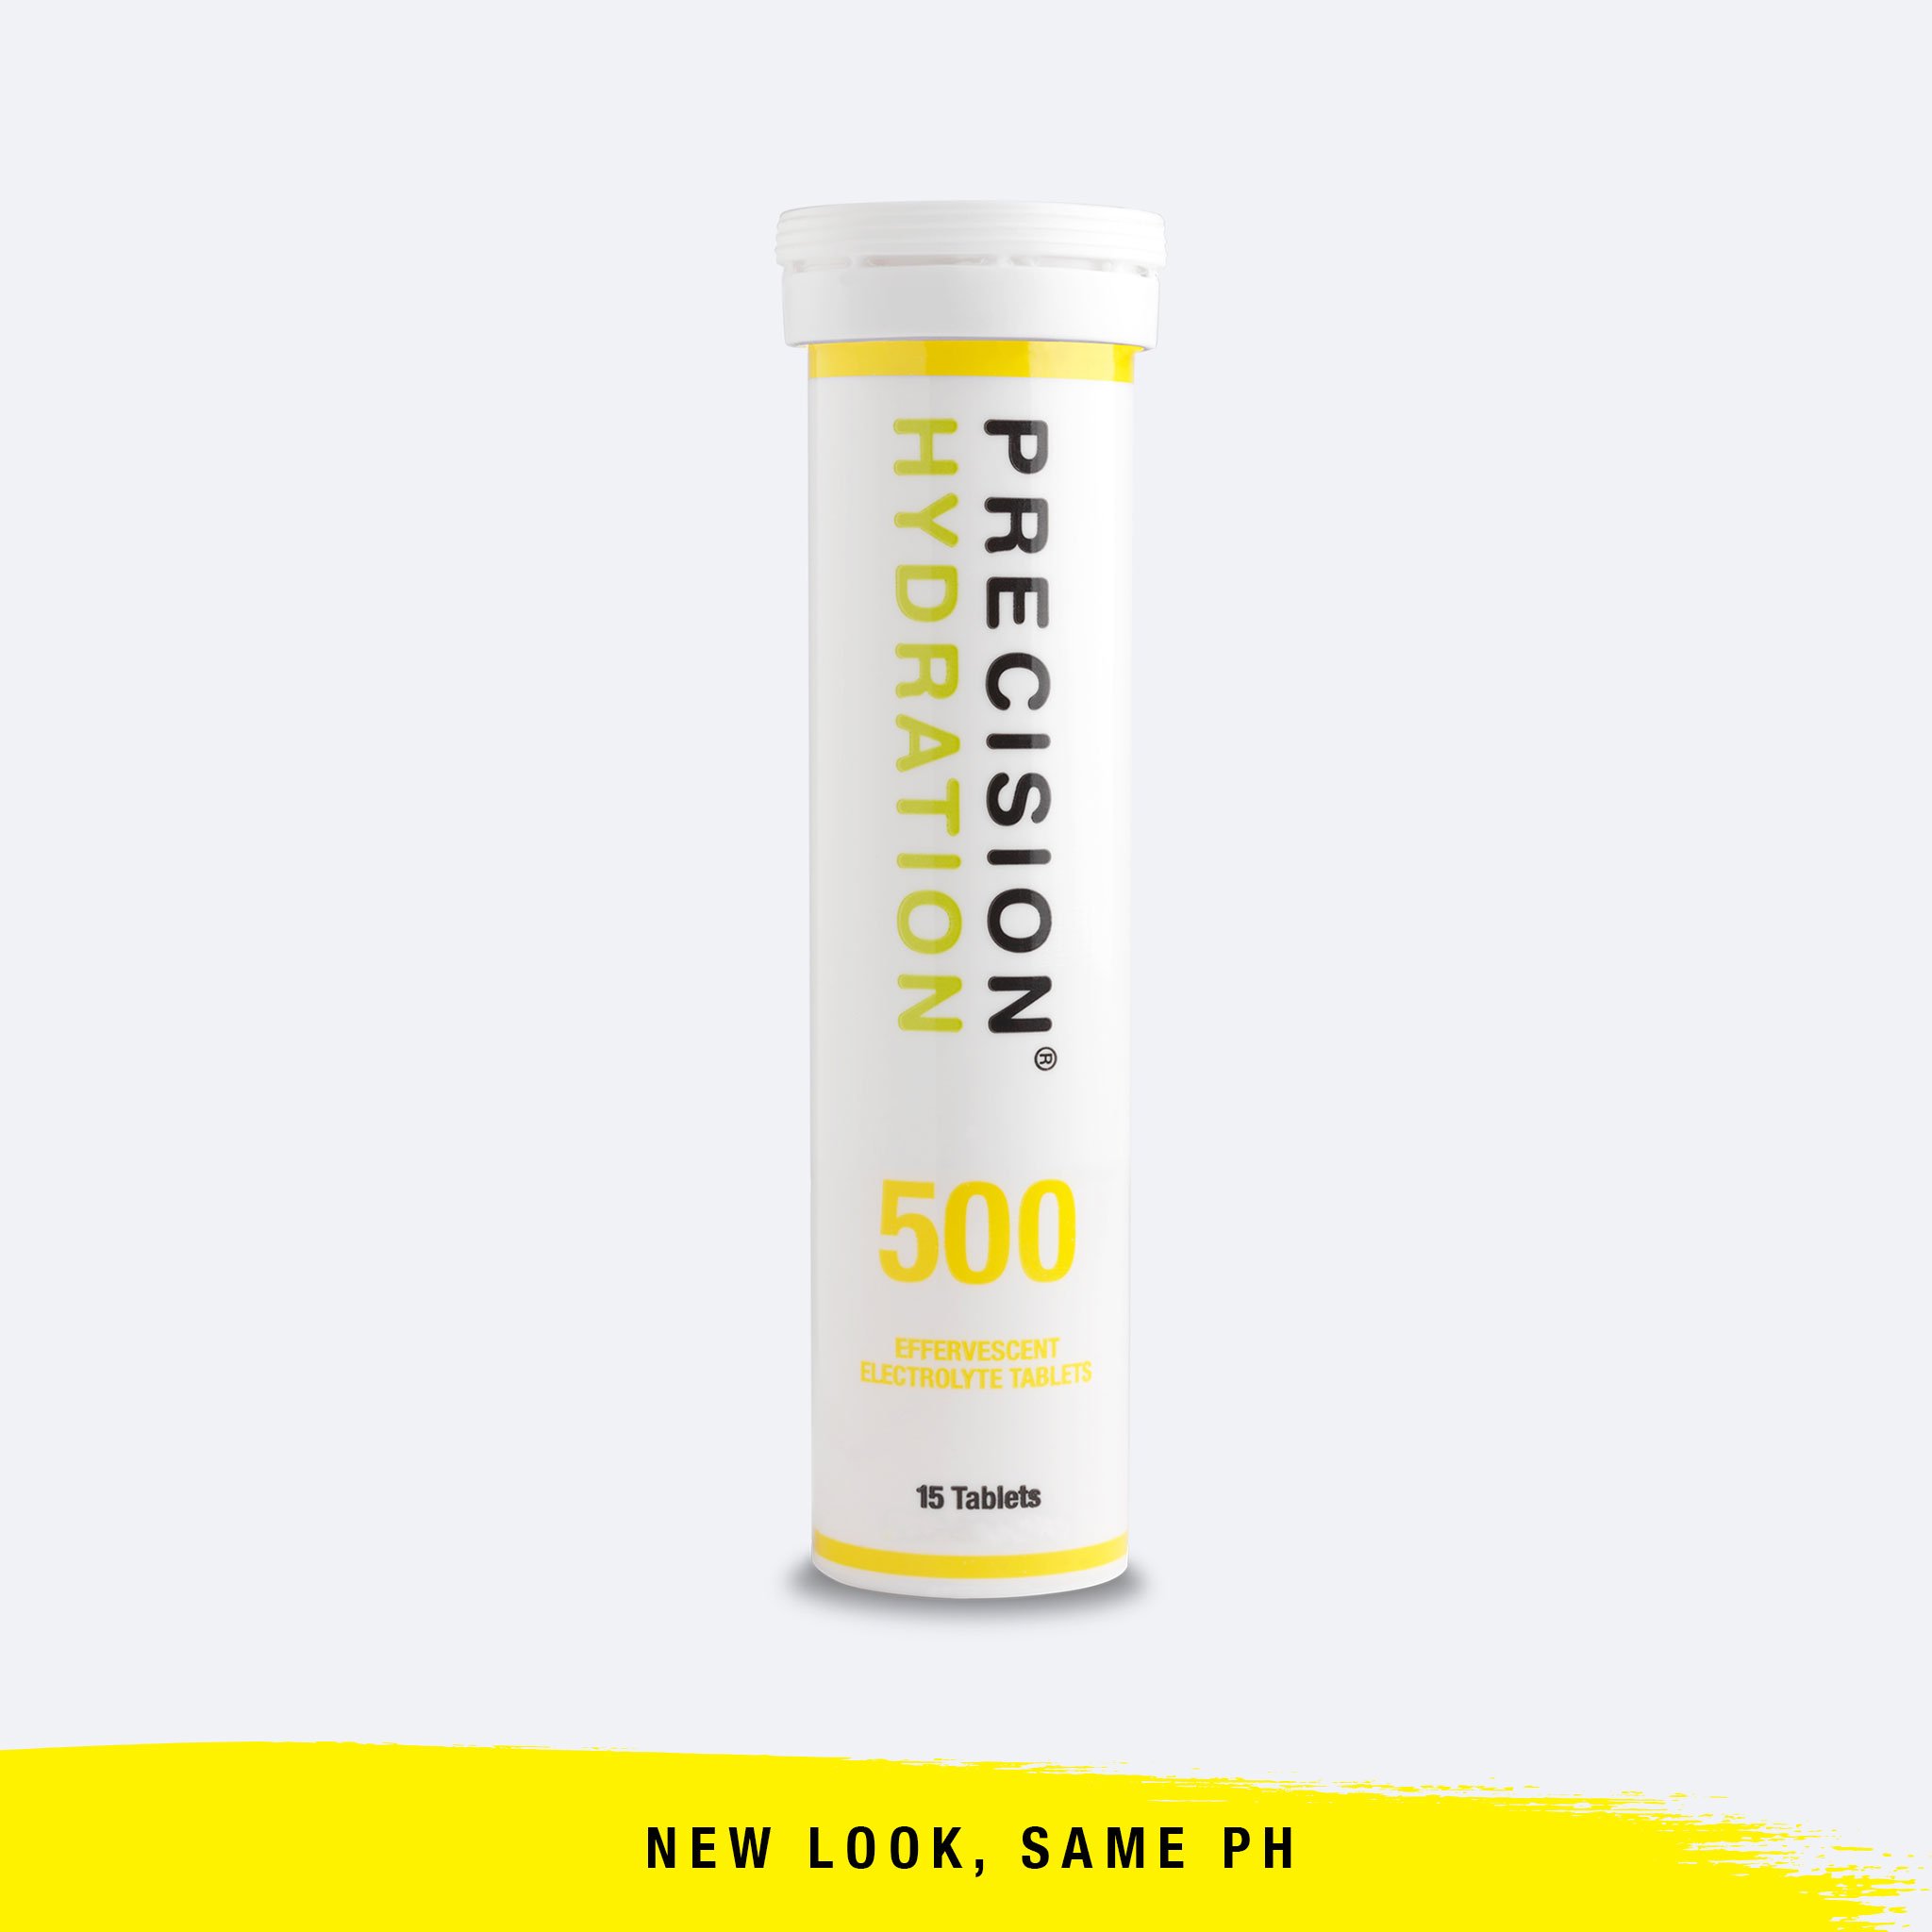 Tube of Precision Hydration 500 Electrolyte tabs.